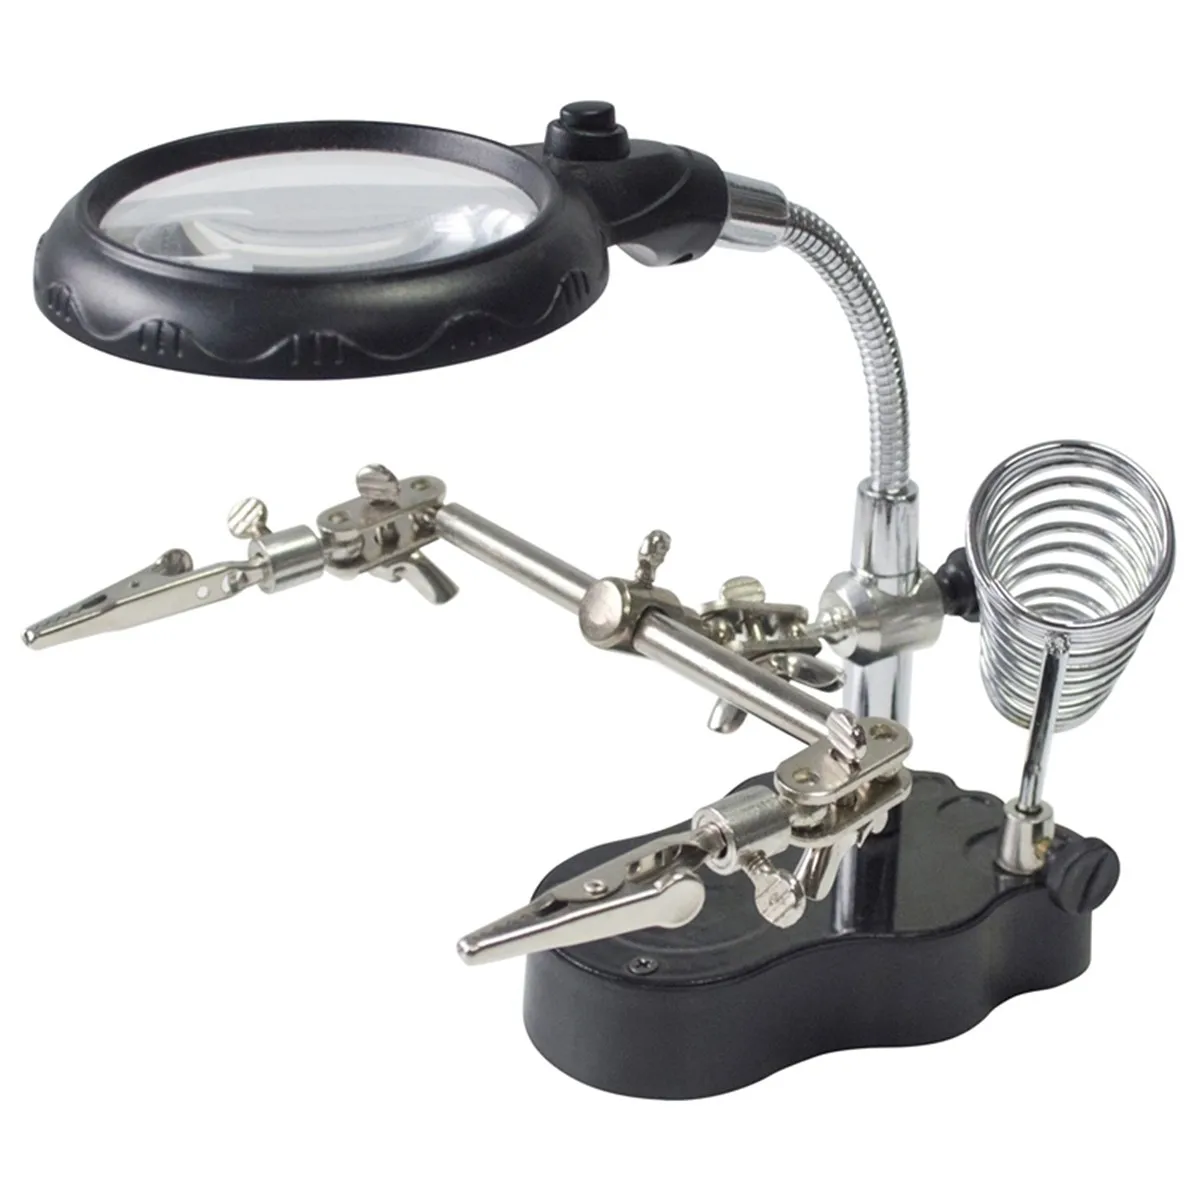 for Soldering Assembly Repair Modeling Welding Magnifying Glass Clamp LED Light Hands-Free Magnifying Glass Stand with Clamp And Alligator Clips